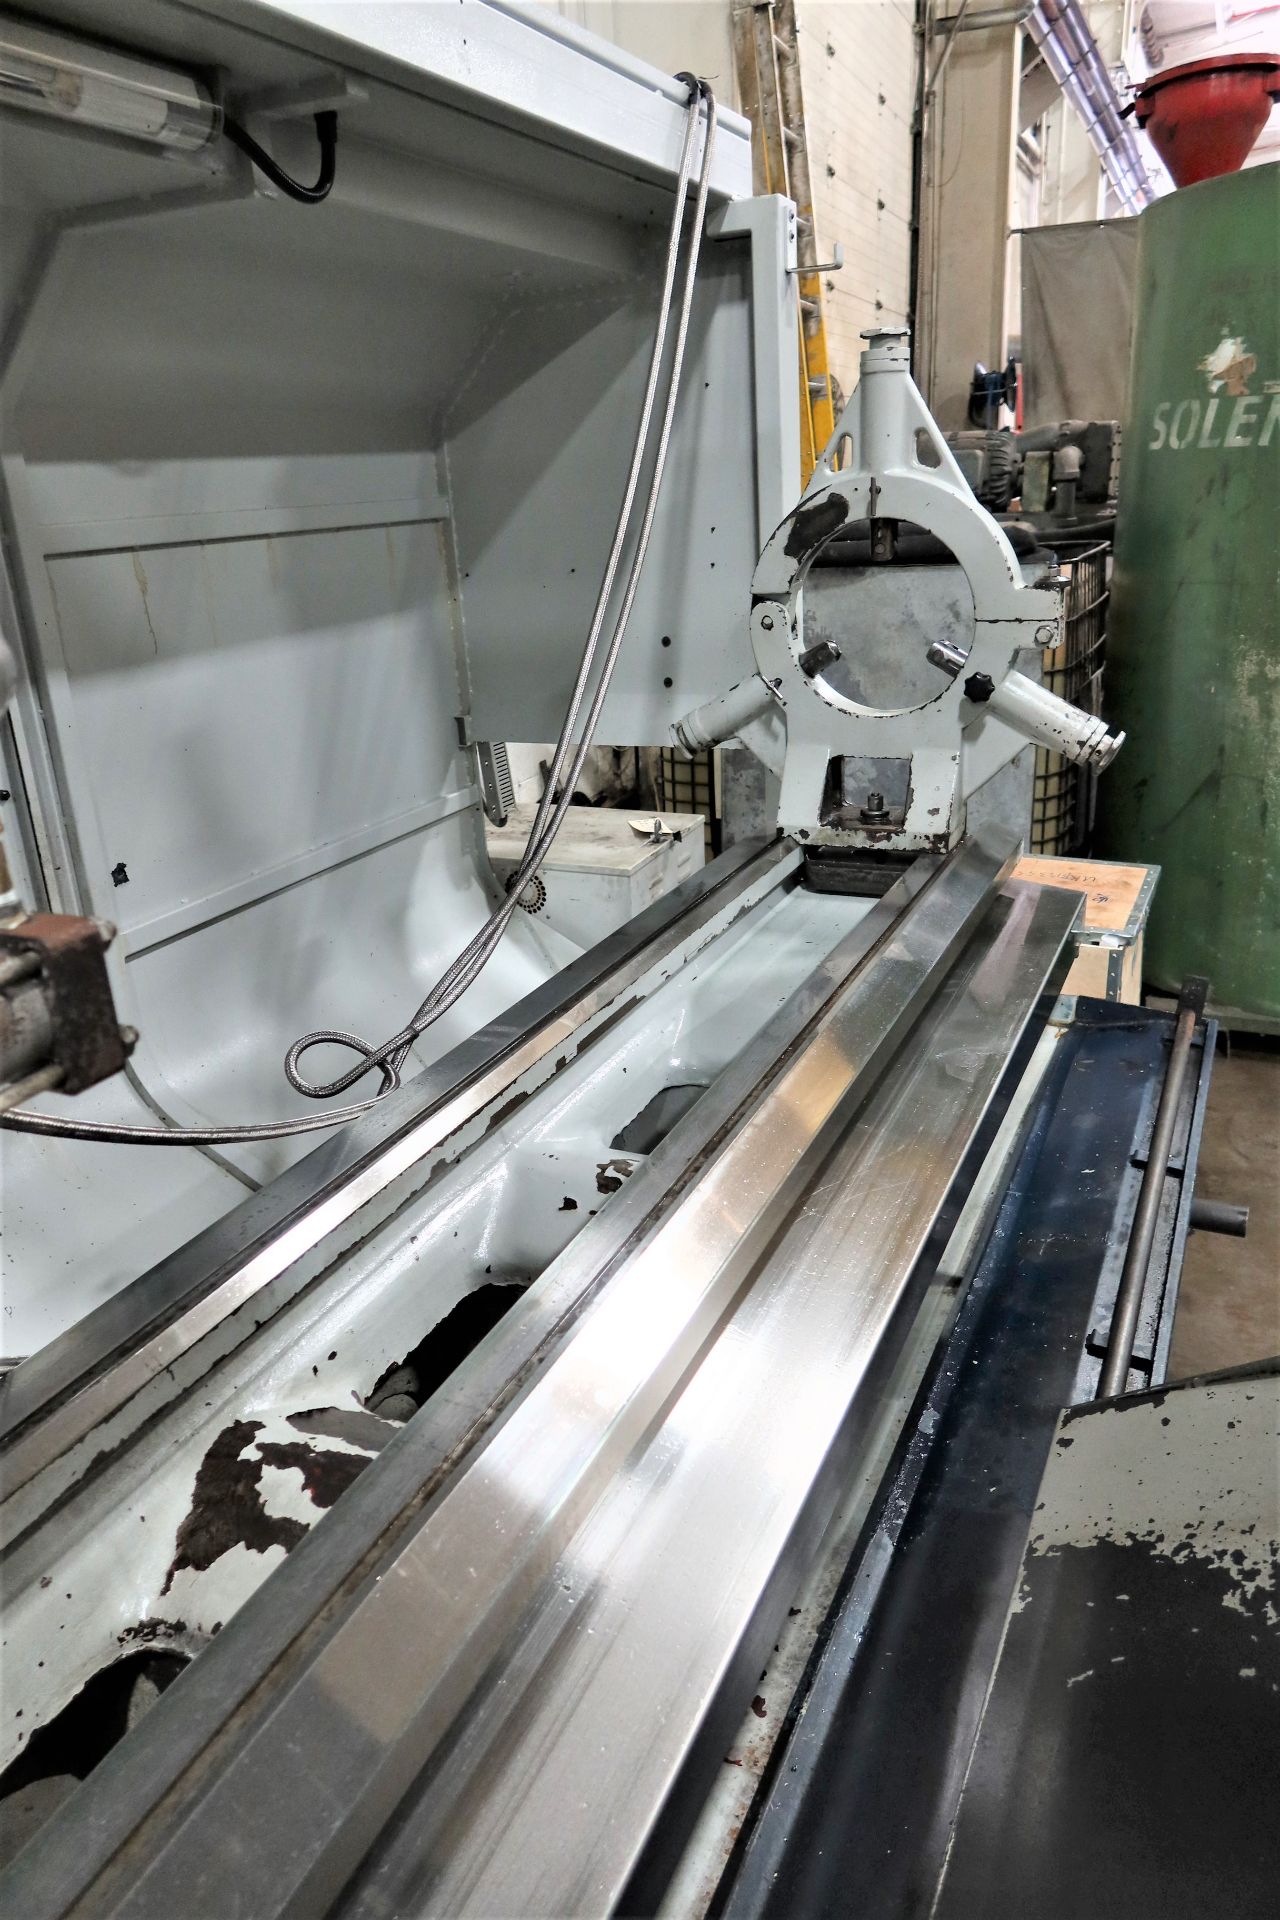 28"x120" Sunfirm 2-Axis CNC Flat Bed Turning Center Lathe, S/N 21232, New 2012 - Image 13 of 20